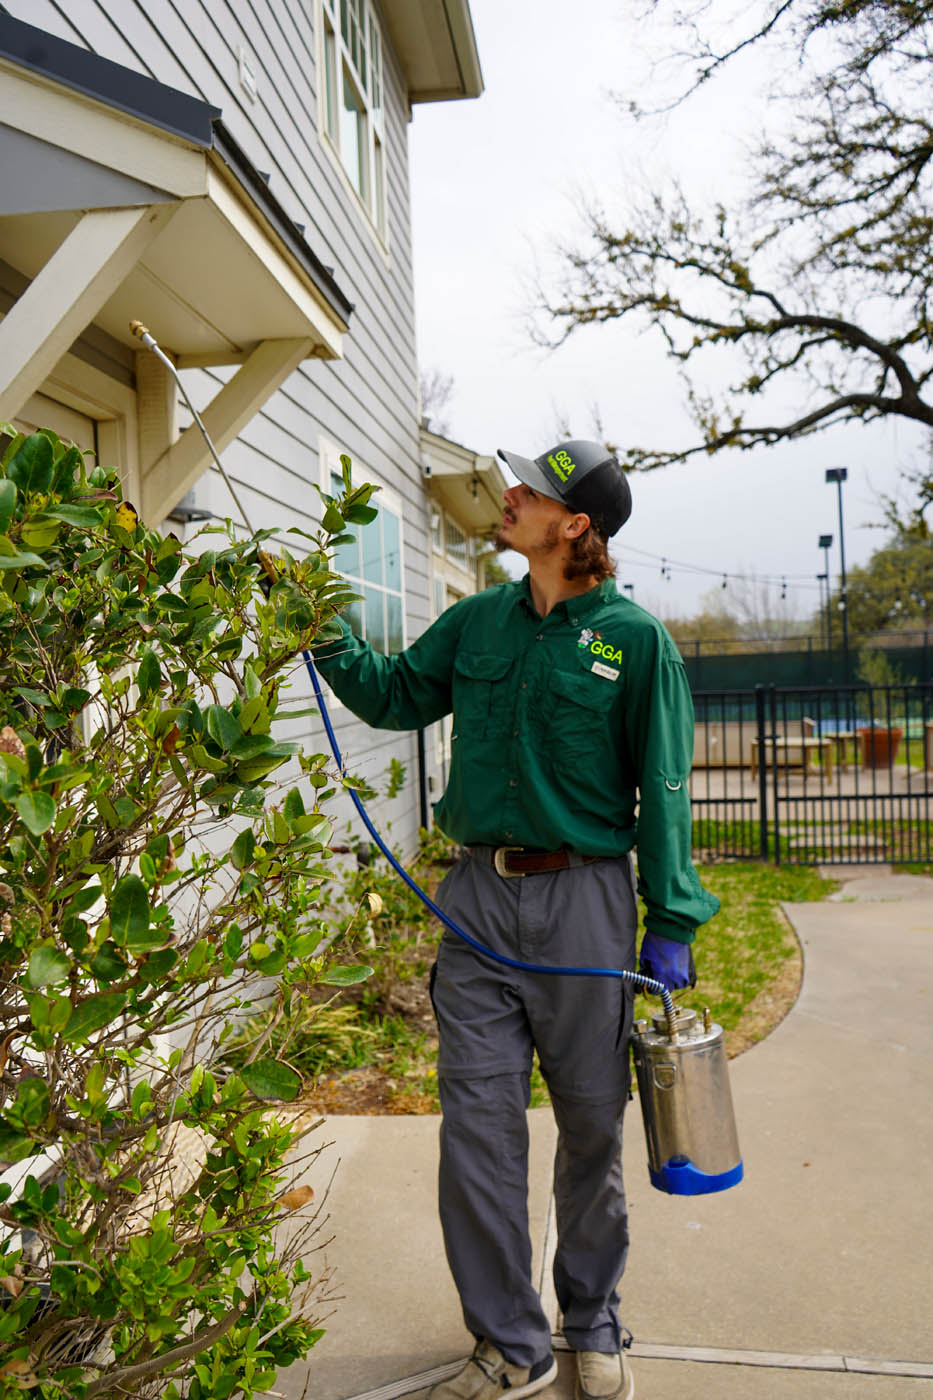 A GGA Pest Management employee working on residential home - choose GGA Pest Management for the best Hillsboro exterminator pest control services.